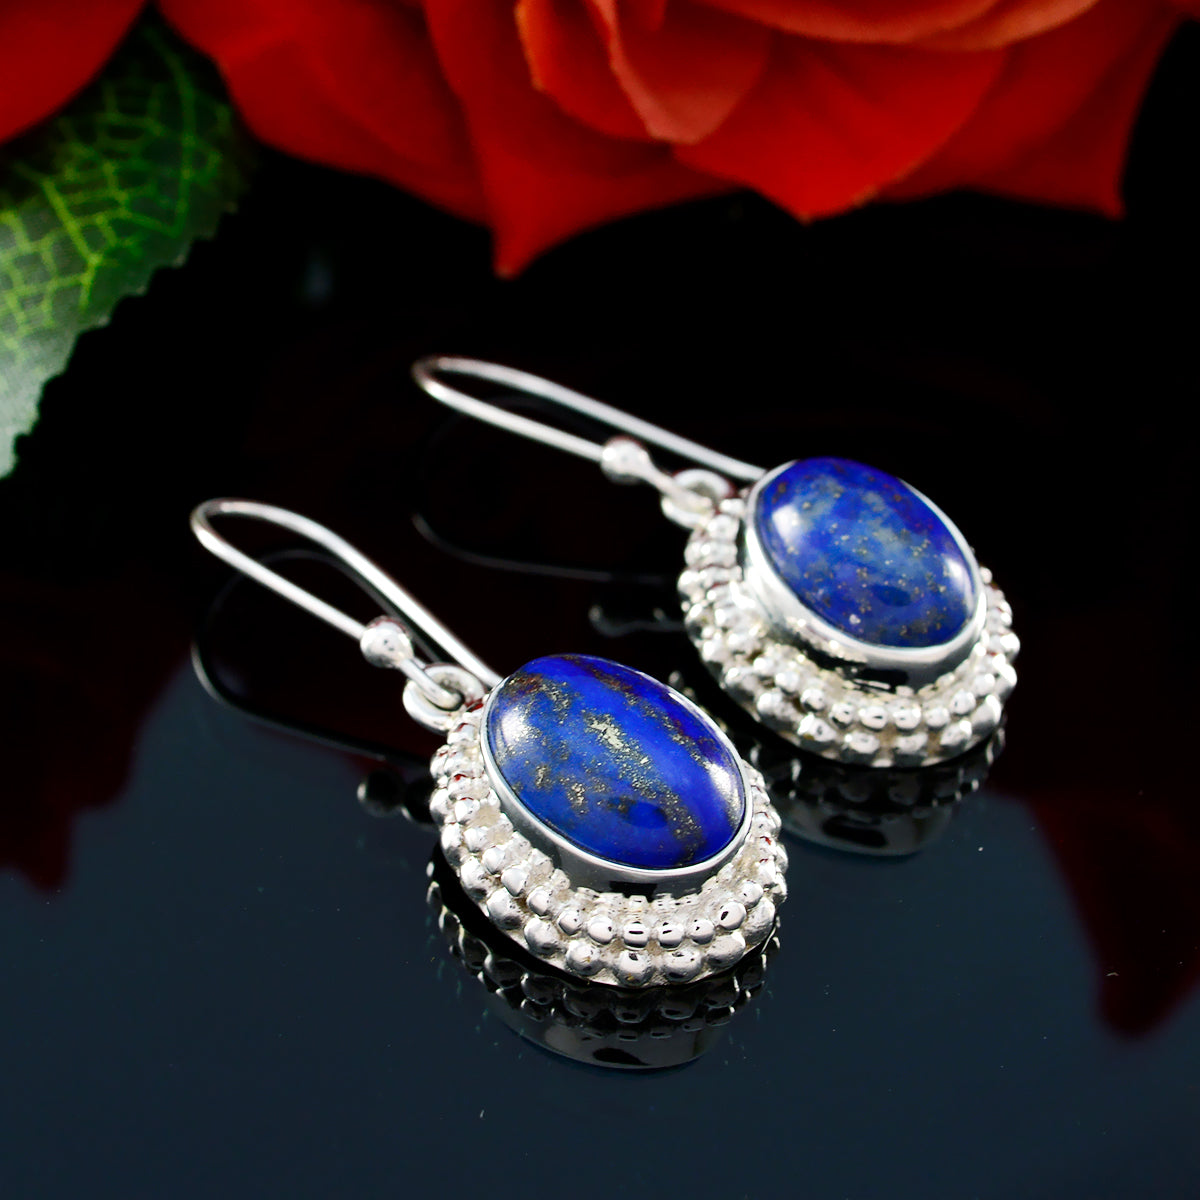 Riyo Good Gemstones round Cabochon Nevy Blue Lapis Lazuli Silver Earring gift for independence day